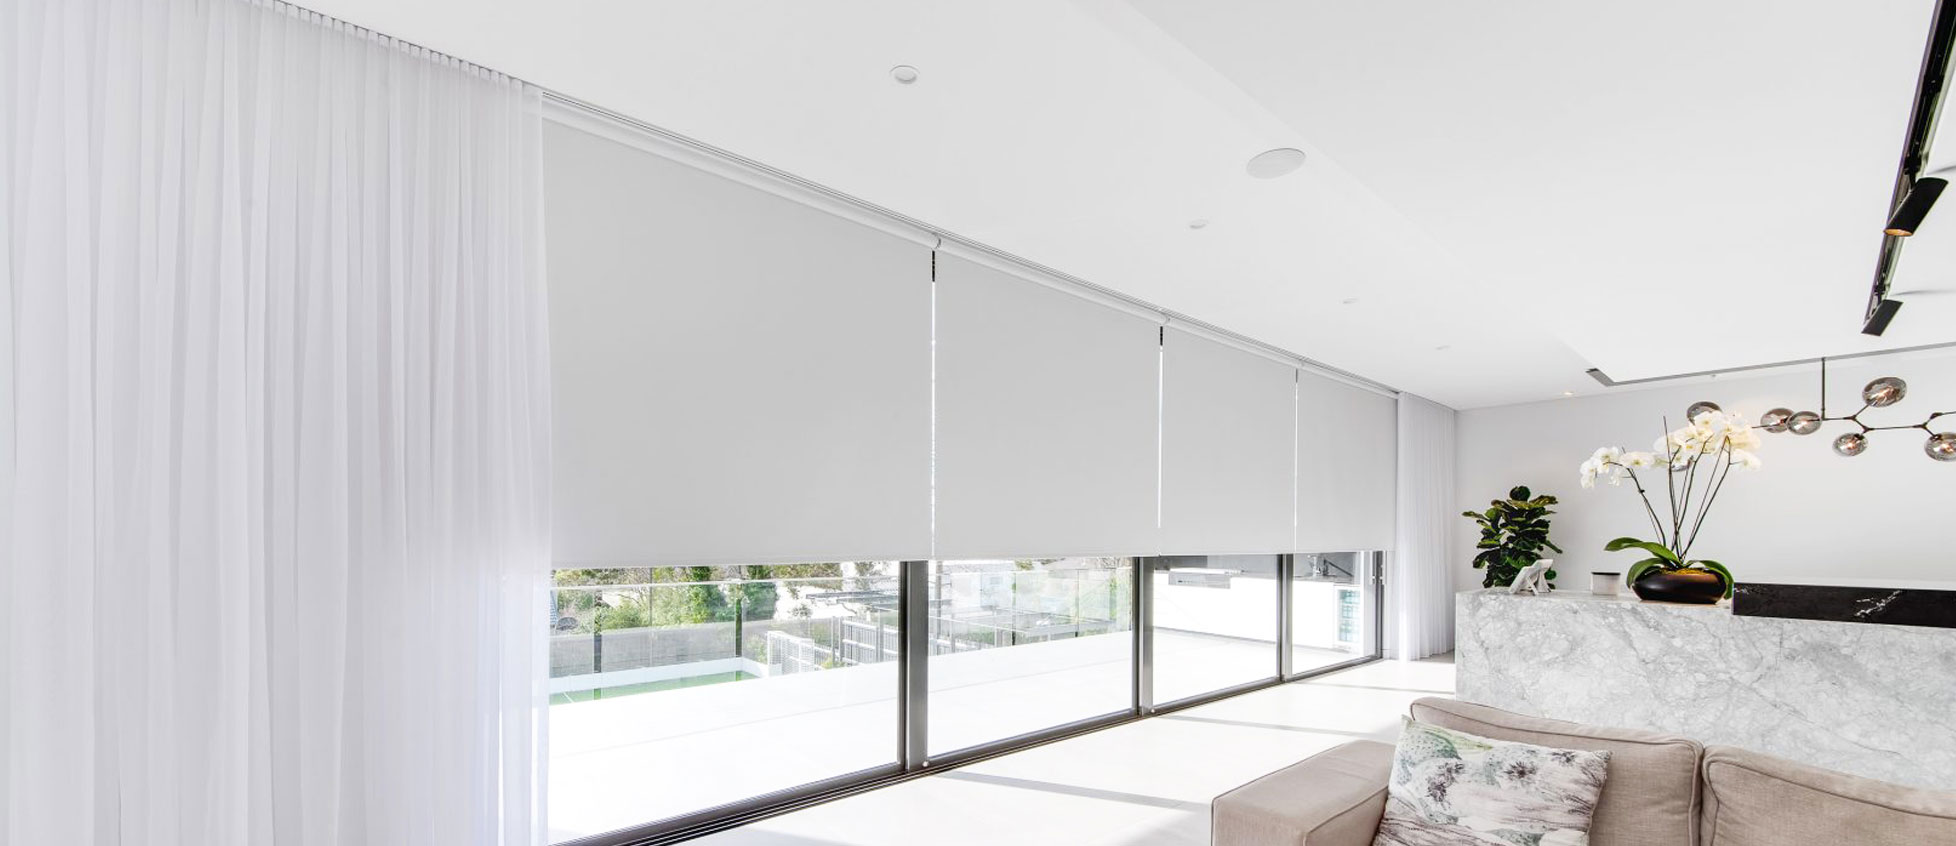 Blinds-with-Sheers